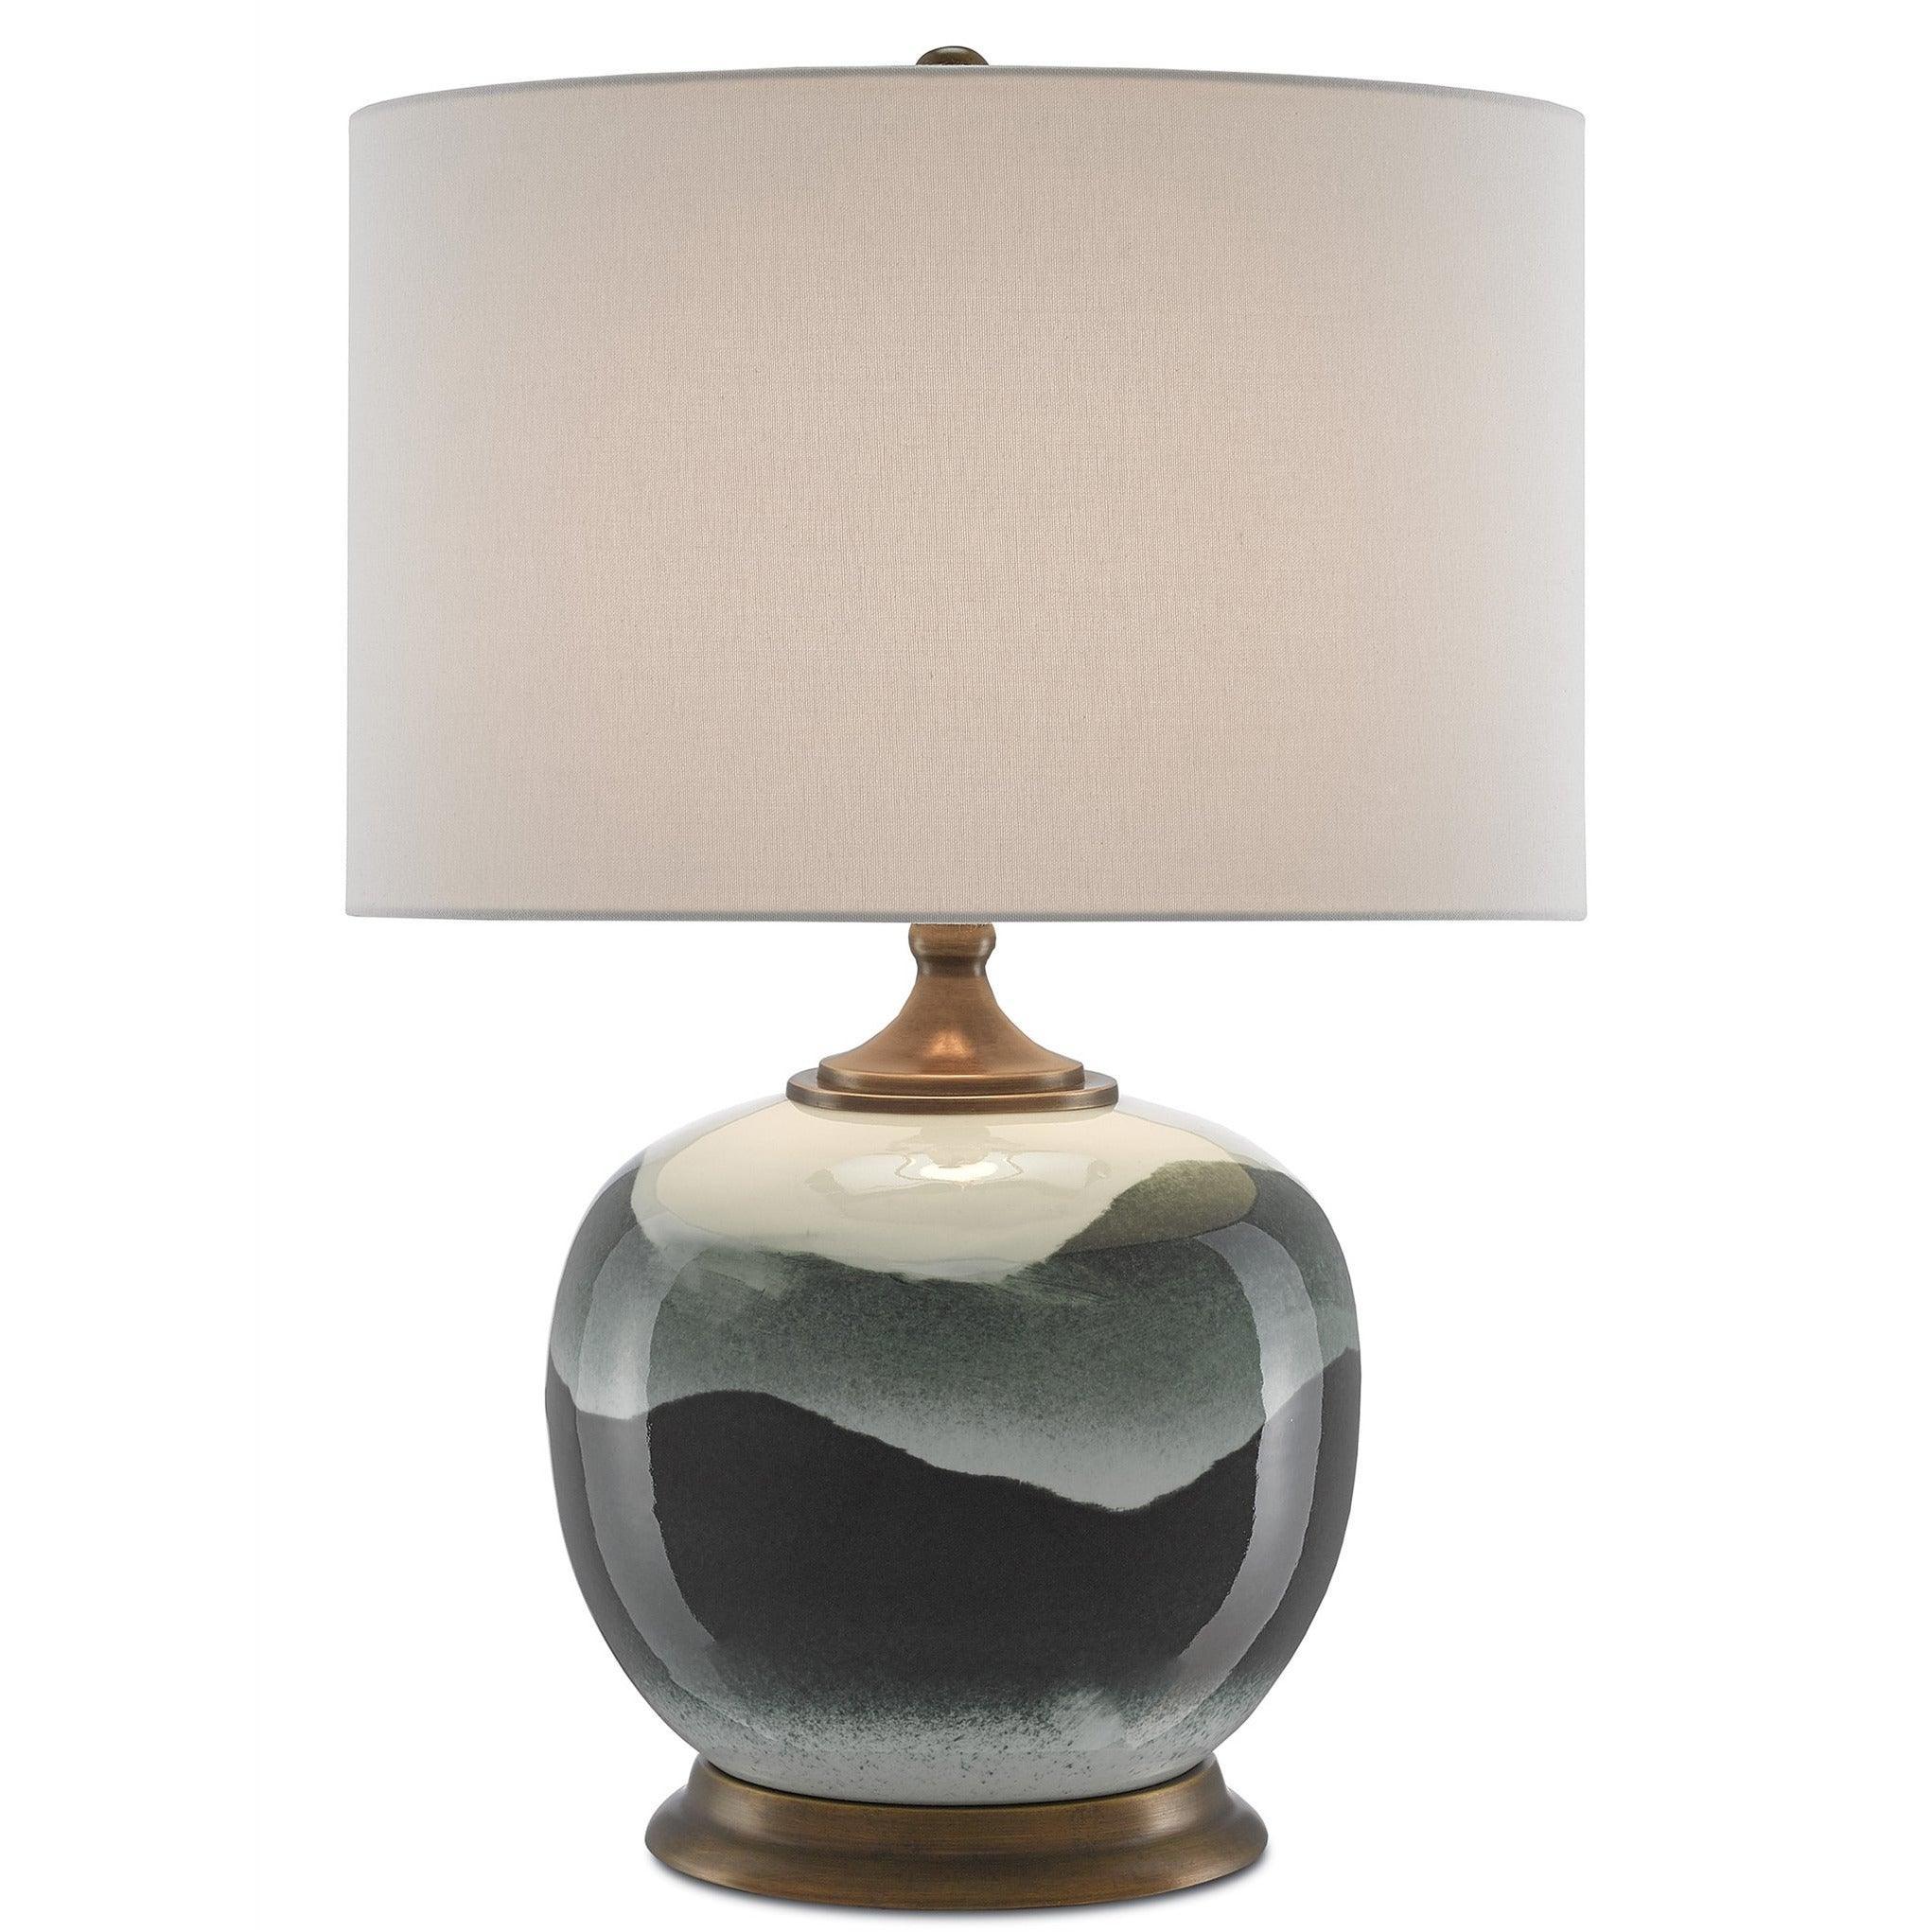 Currey and Company - Boreal Table Lamp - 6000-0109 | Montreal Lighting & Hardware